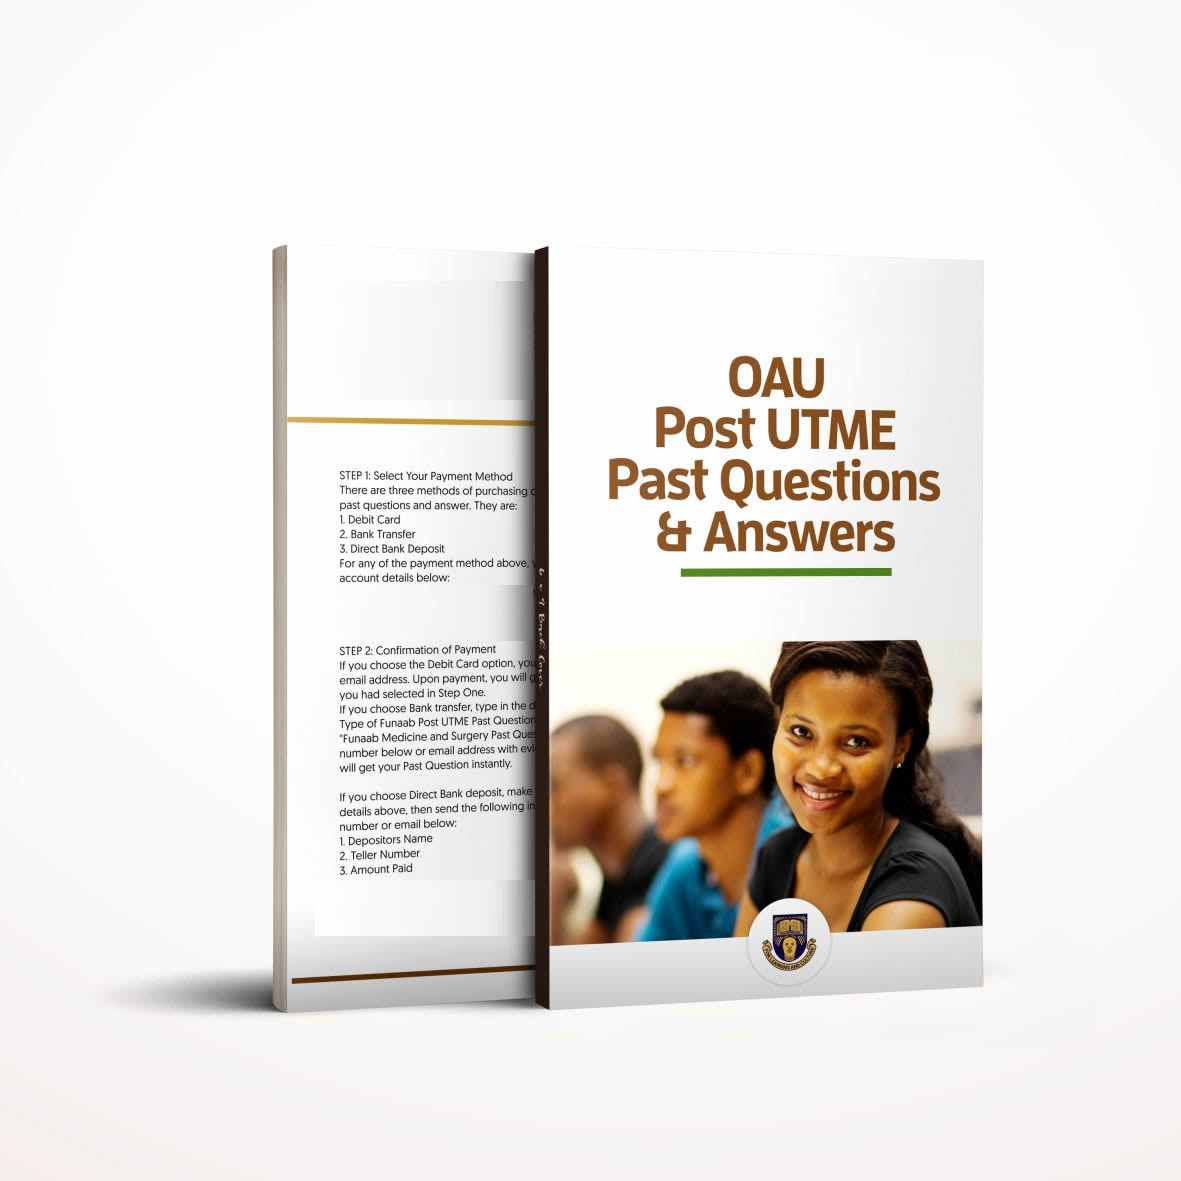 OAU Post UTME past questions and answers